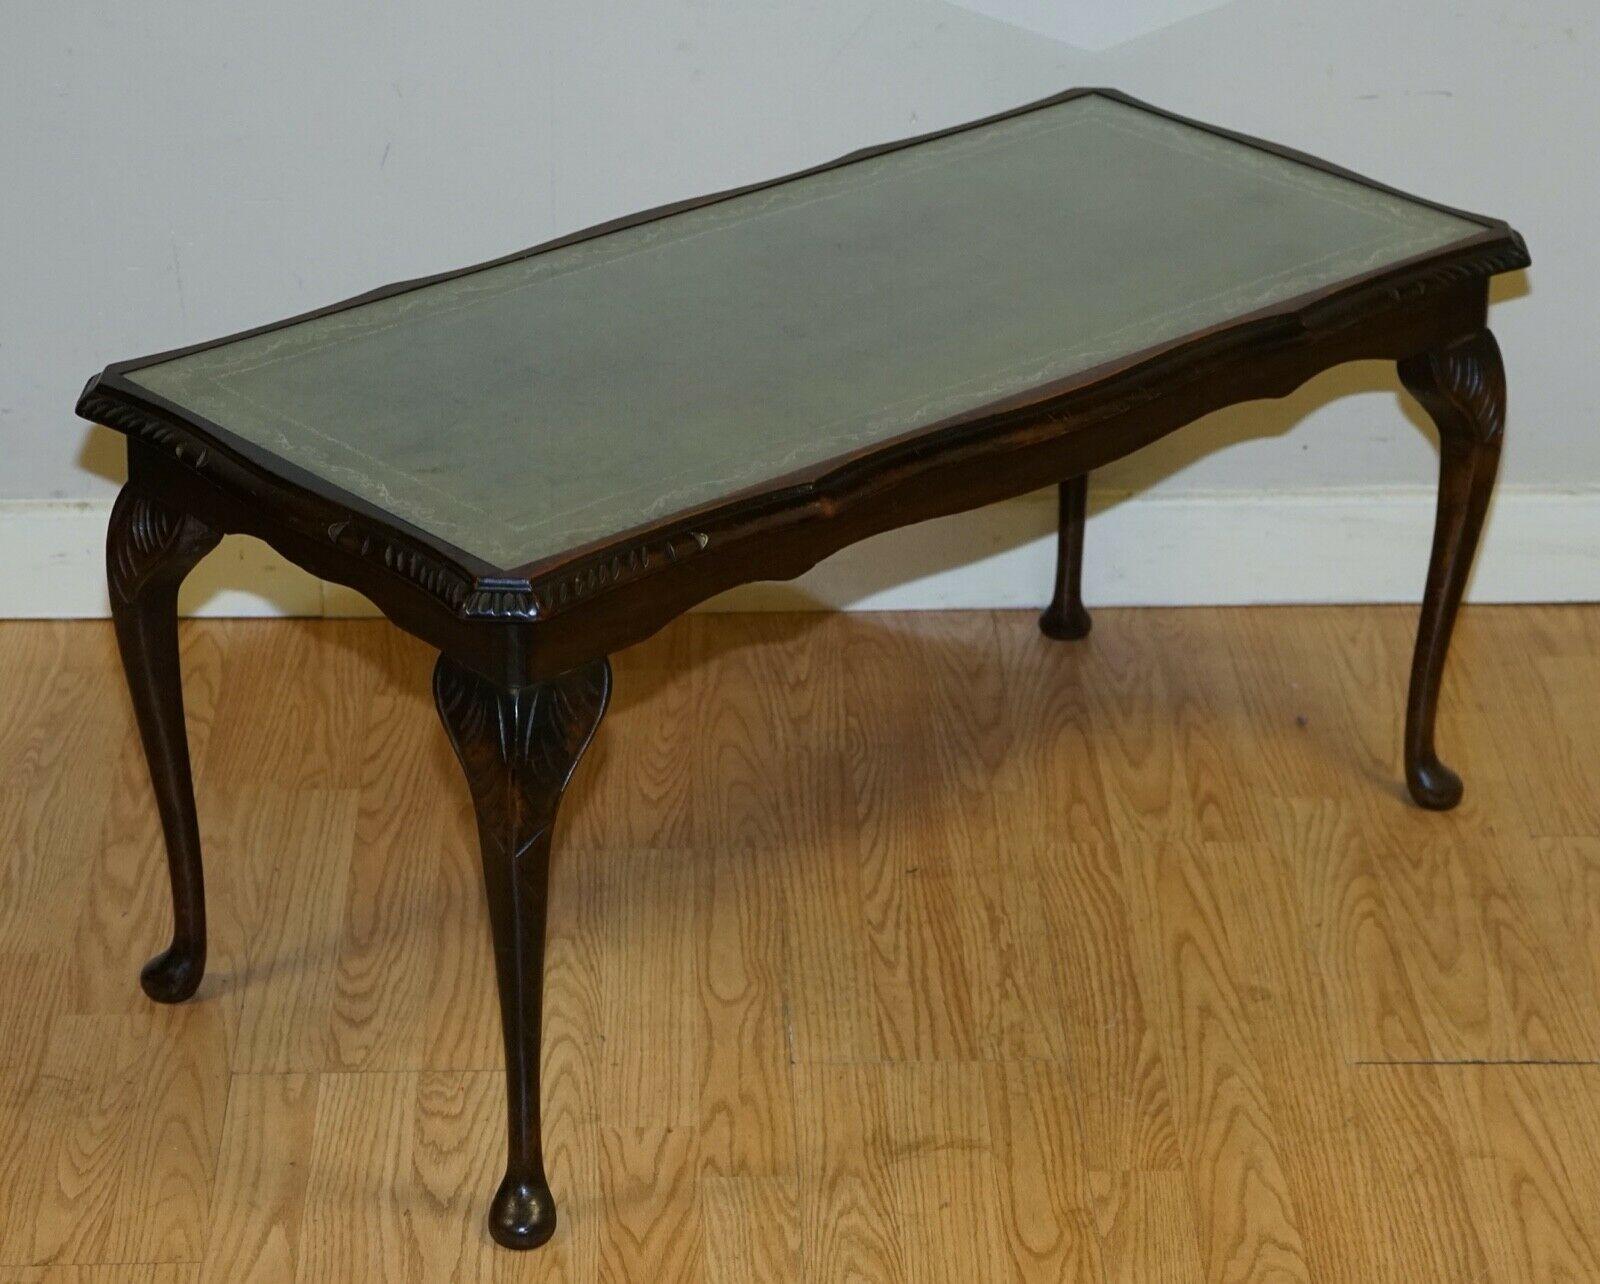 We are delighted to sell this Very Elegant Vintage Green Leather top Coffee Table.
The top part of the wood is quite faded but gives it a vintage look, the rest of the coffee table is in a good condition.
We have lightly restored this by giving it